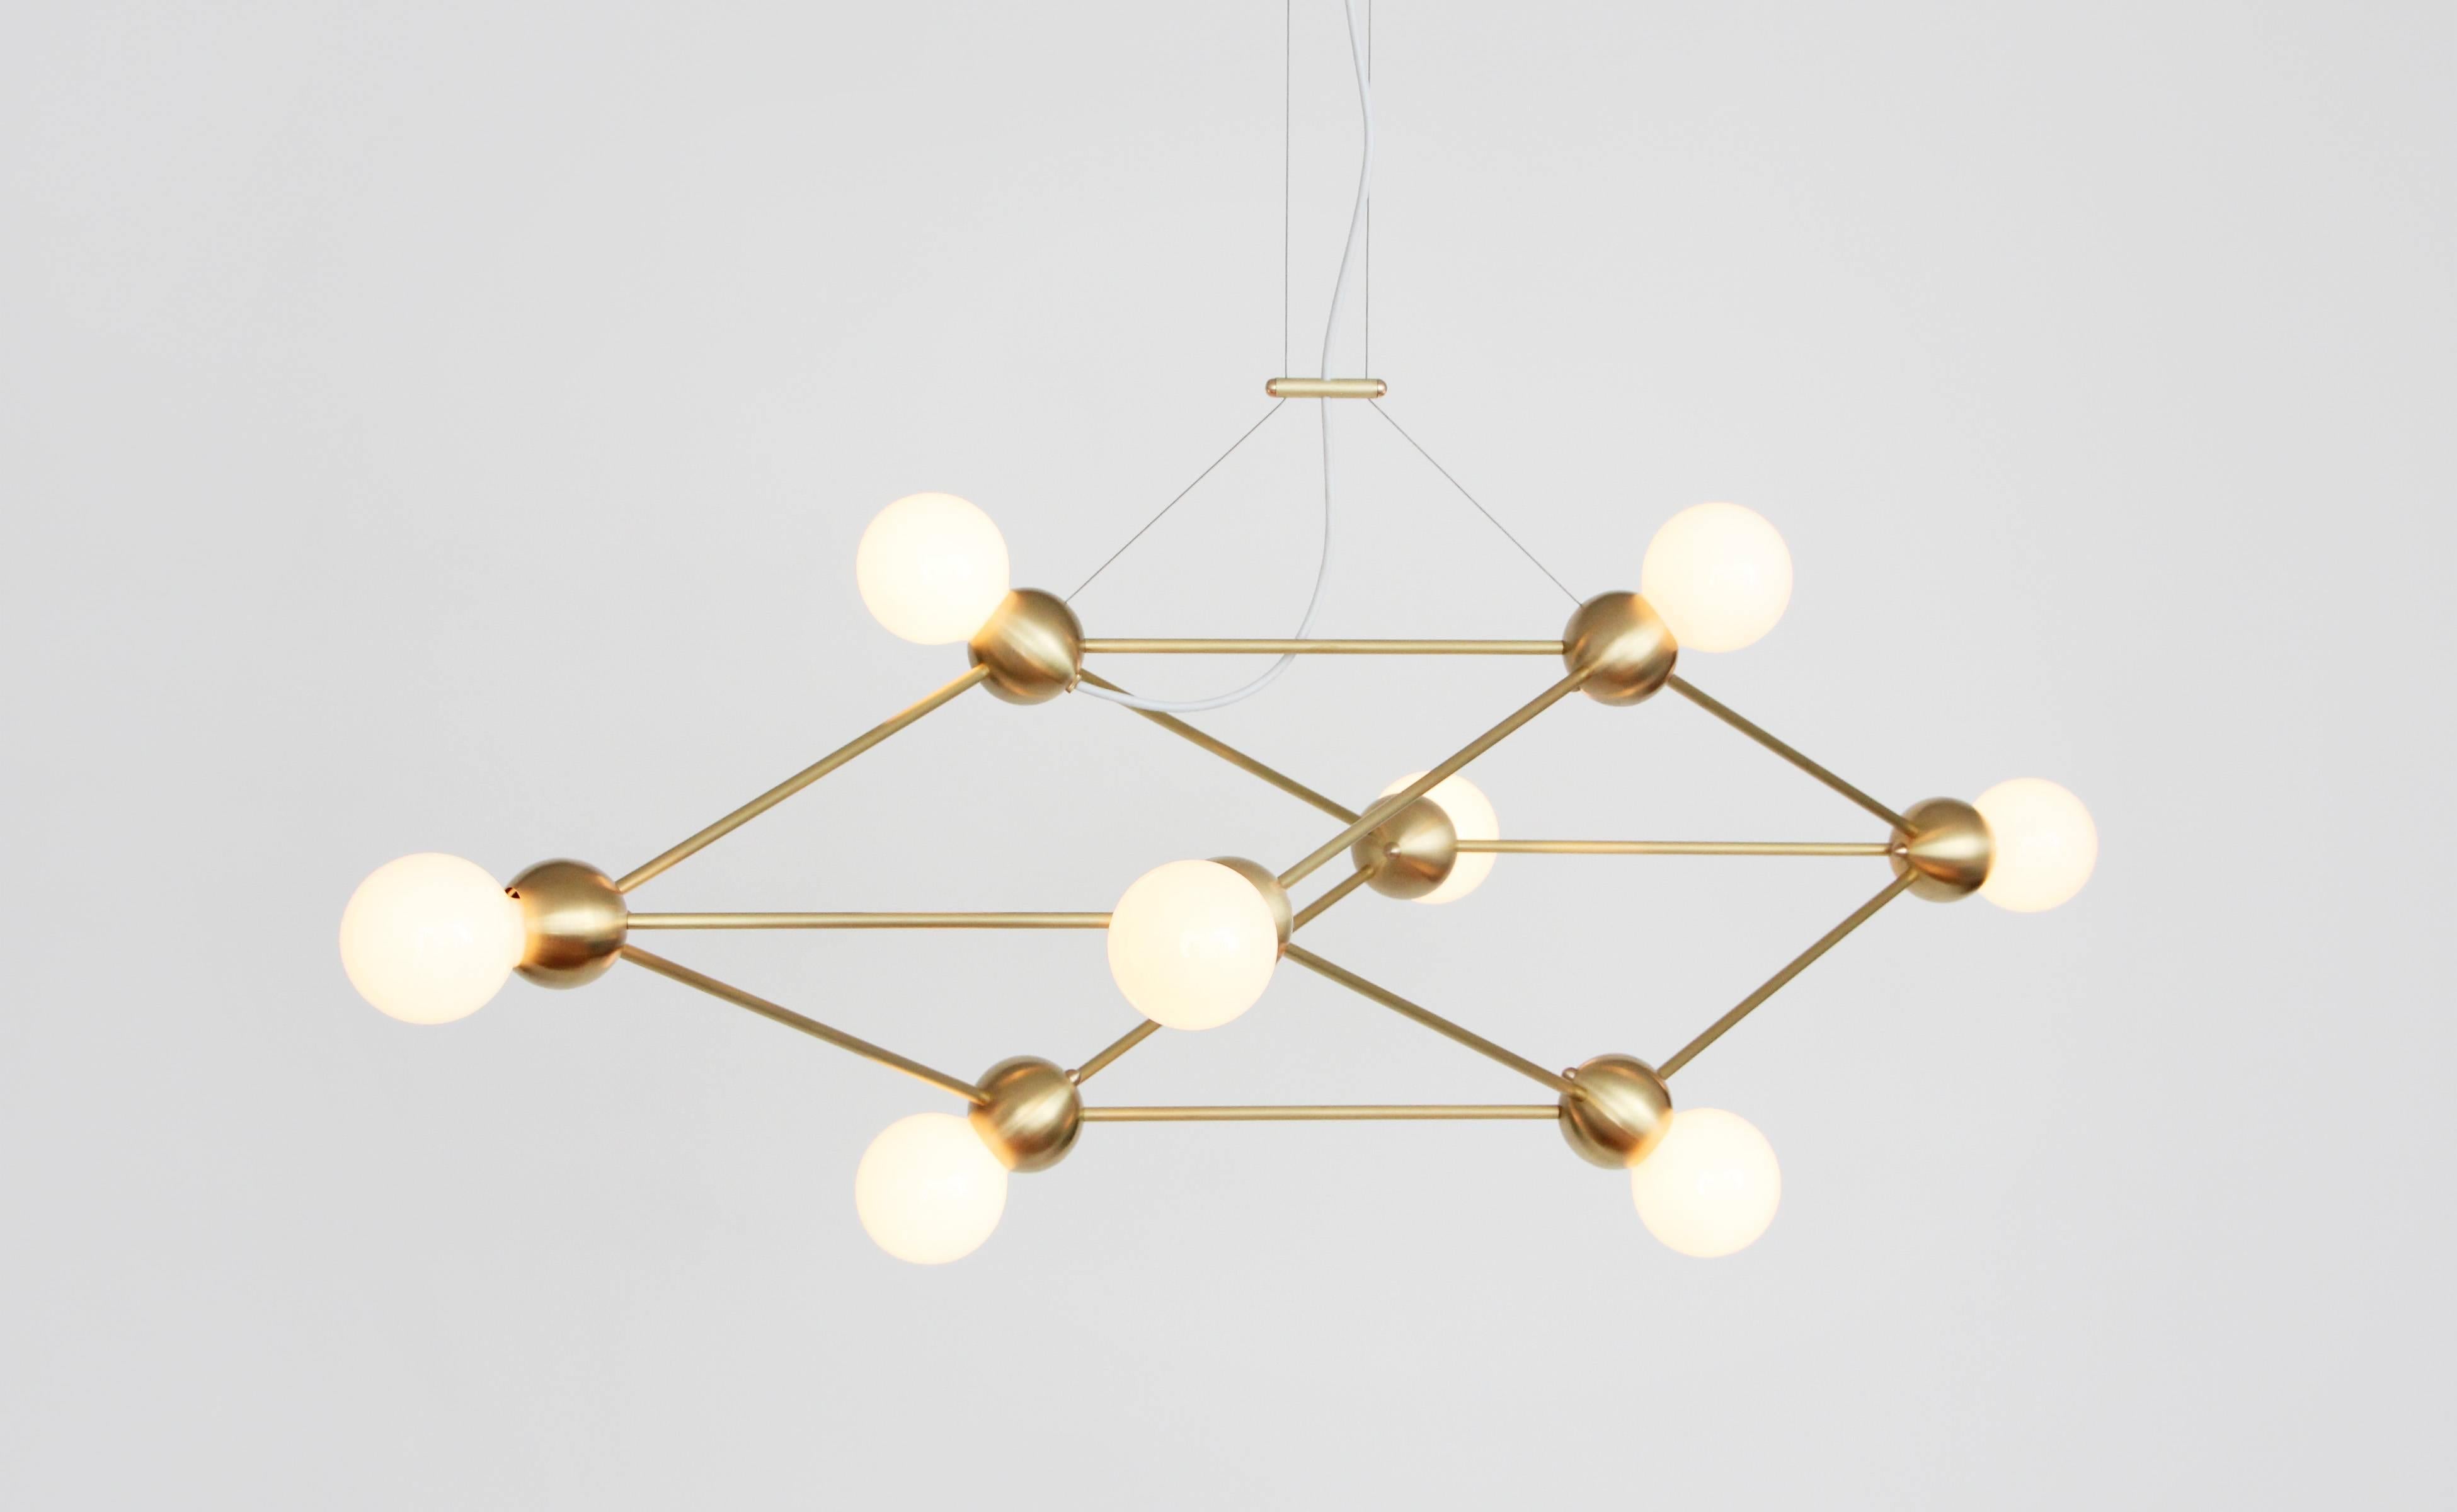 Inspired by 1960s Italian lighting, Lina is an all-brass lighting system designed to create airy geometric fixtures.

Each welded brass sphere joins with solid brass tubing and minimal fastener hardware to form strikingly simple hanging fixtures